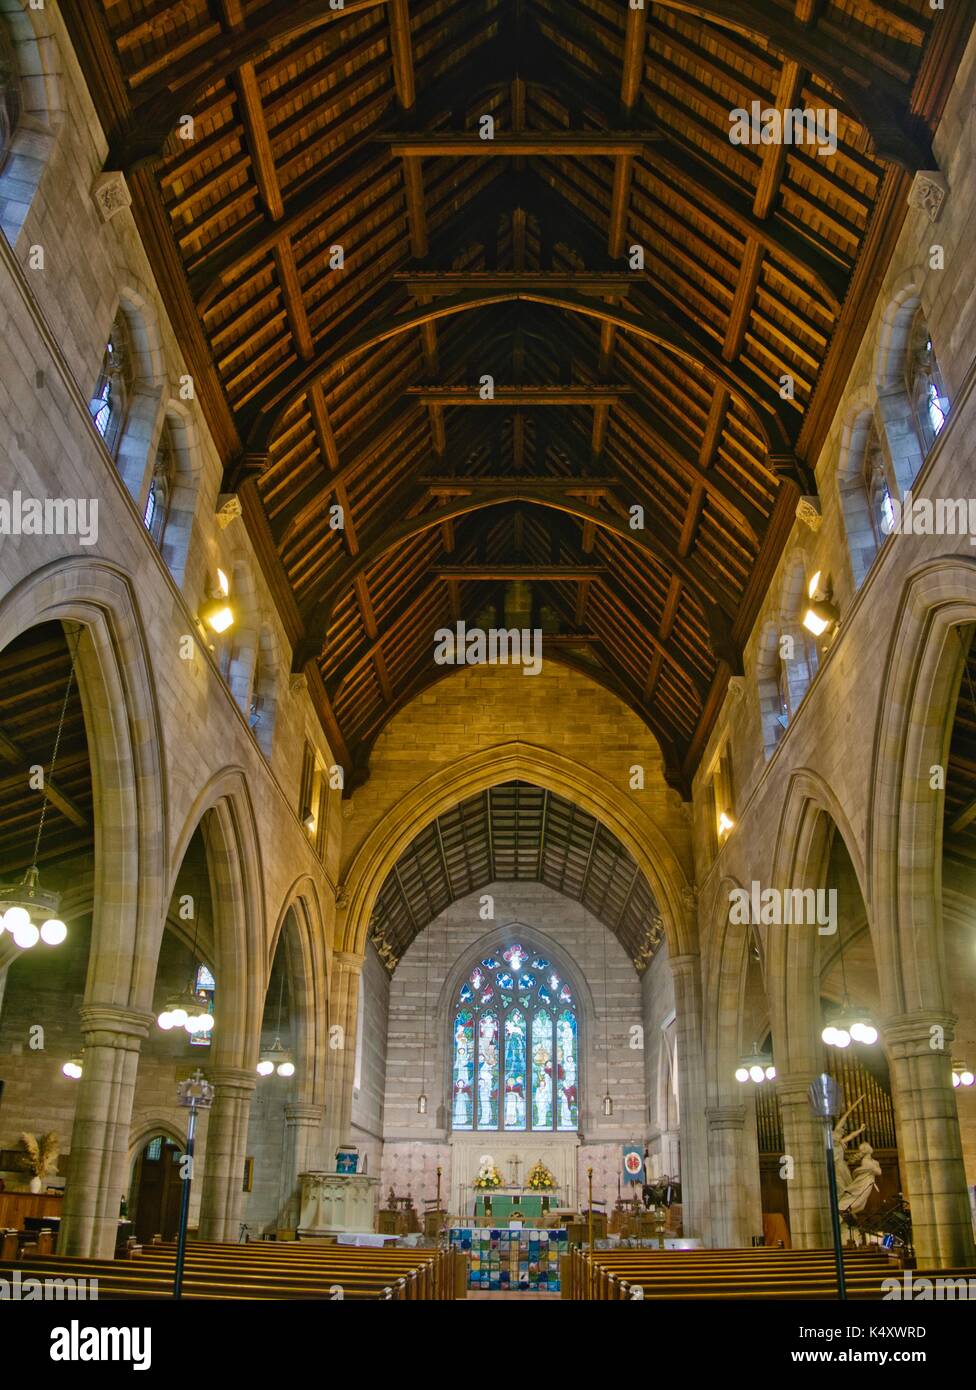 Church of All Hallows, Allerton, Liverpool, dating 1872-86. Grade l Listed Anglican church. Architect G E Grayson. Noted for its stained glass windows Stock Photo